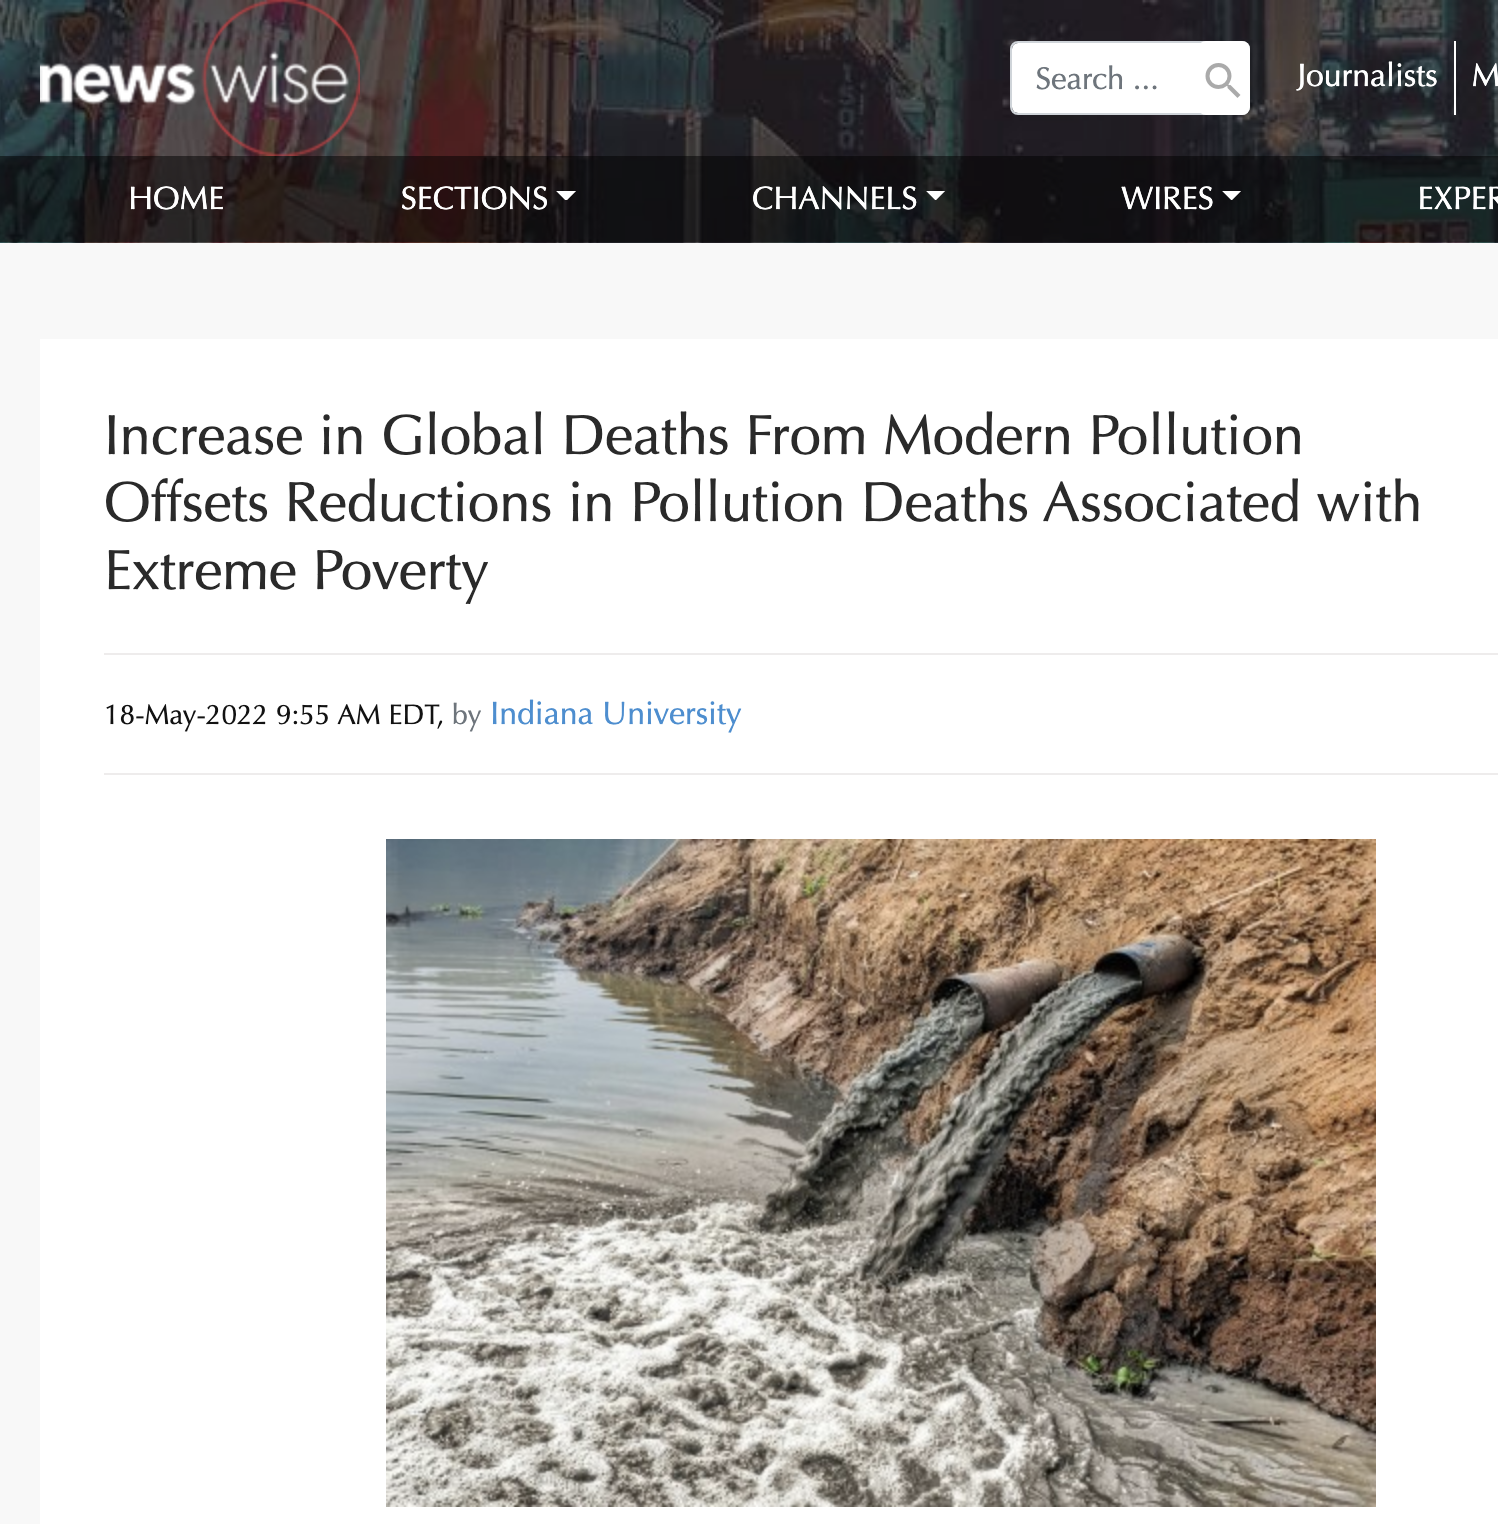 Increase in Global Deaths From Modern Pollution Offsets Reductions in Pollution Deaths Associated with Extreme Poverty